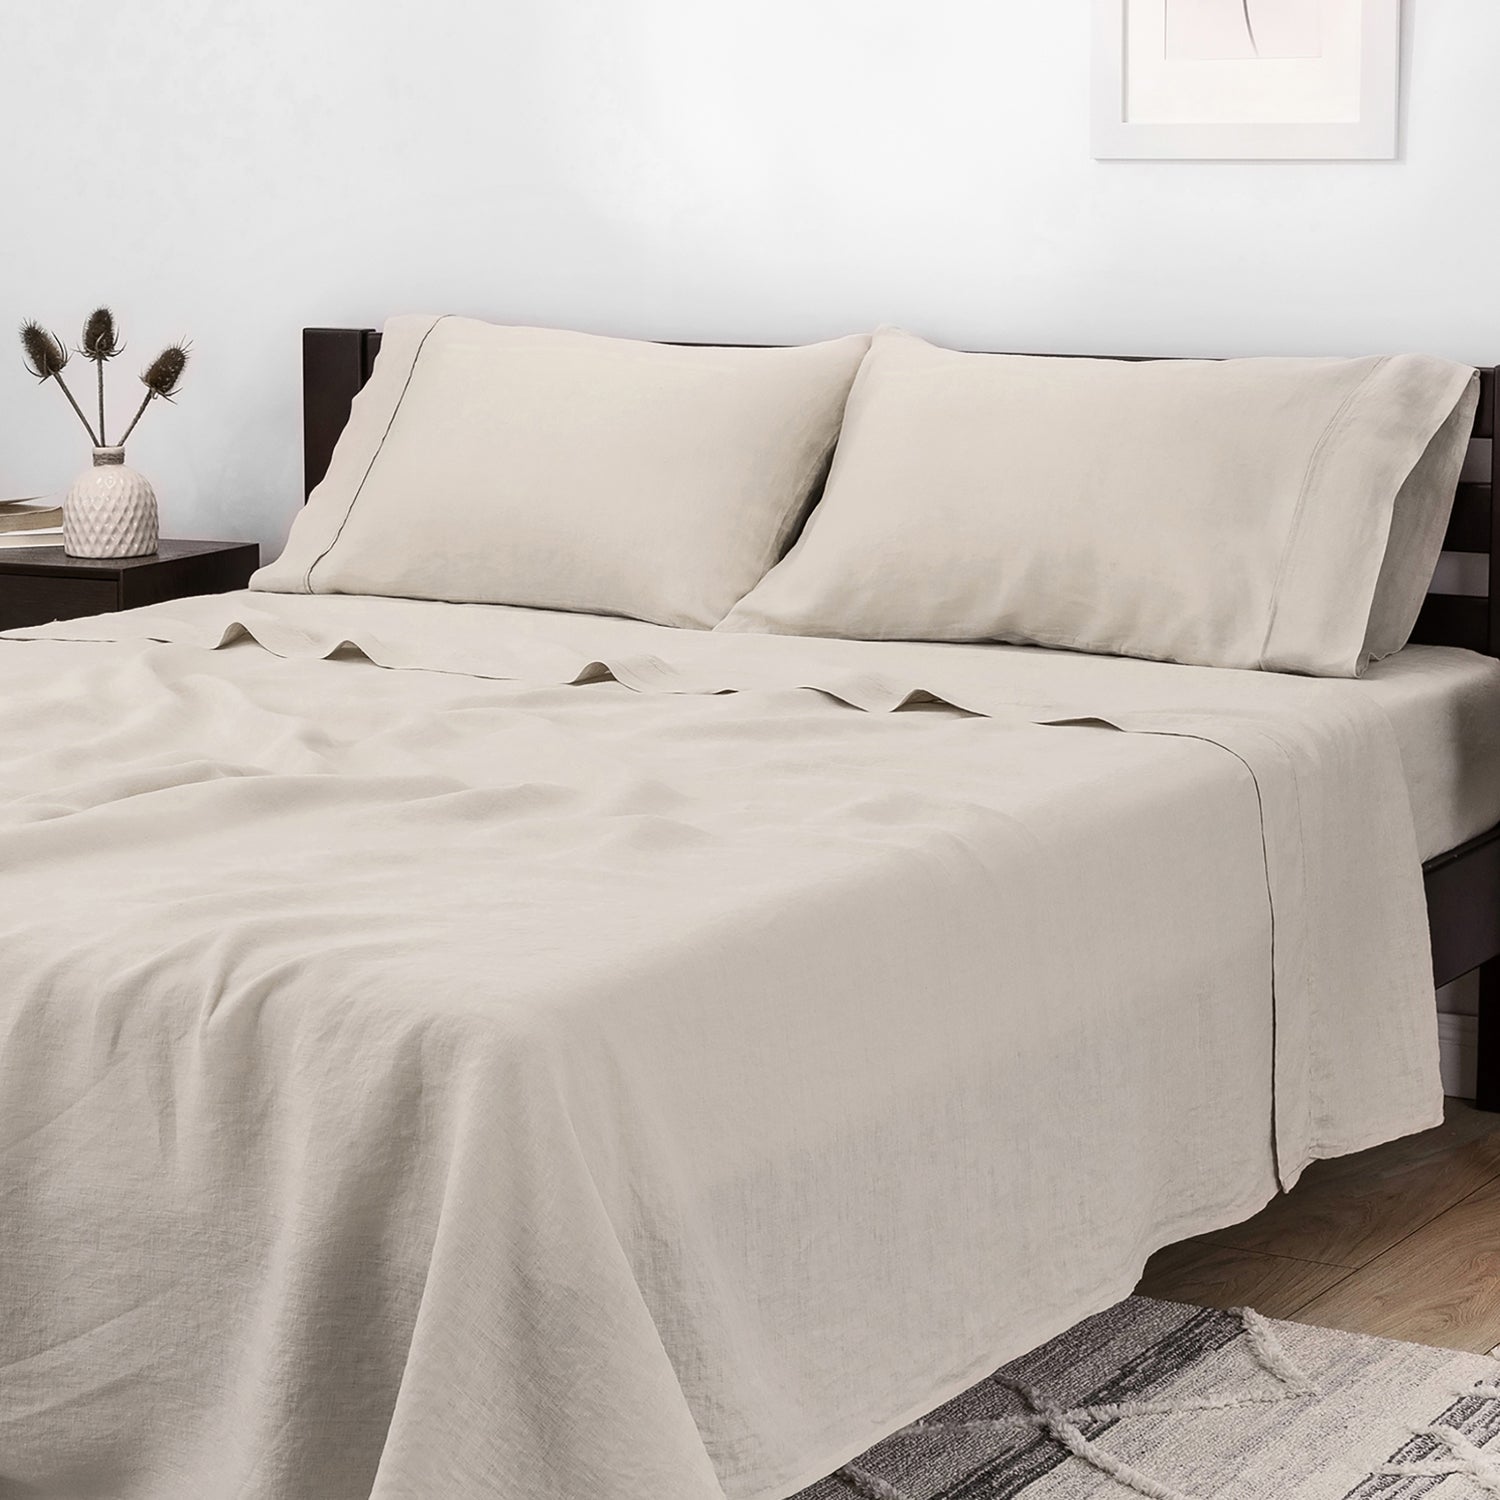 Bedding, Bed Sheets & Linen